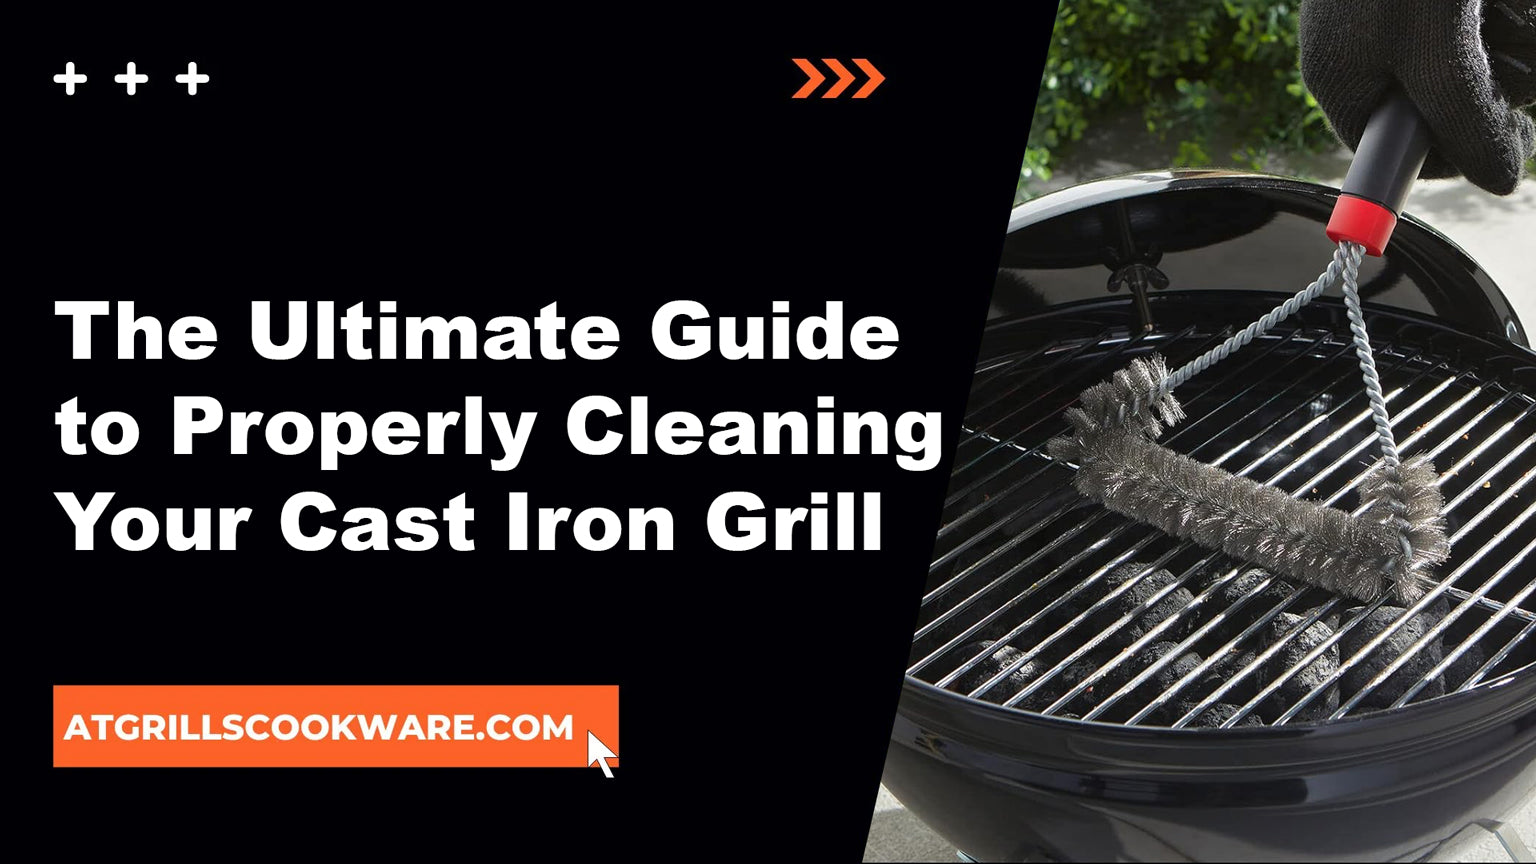 The Ultimate Guide to Properly Cleaning Your Cast Iron Grill